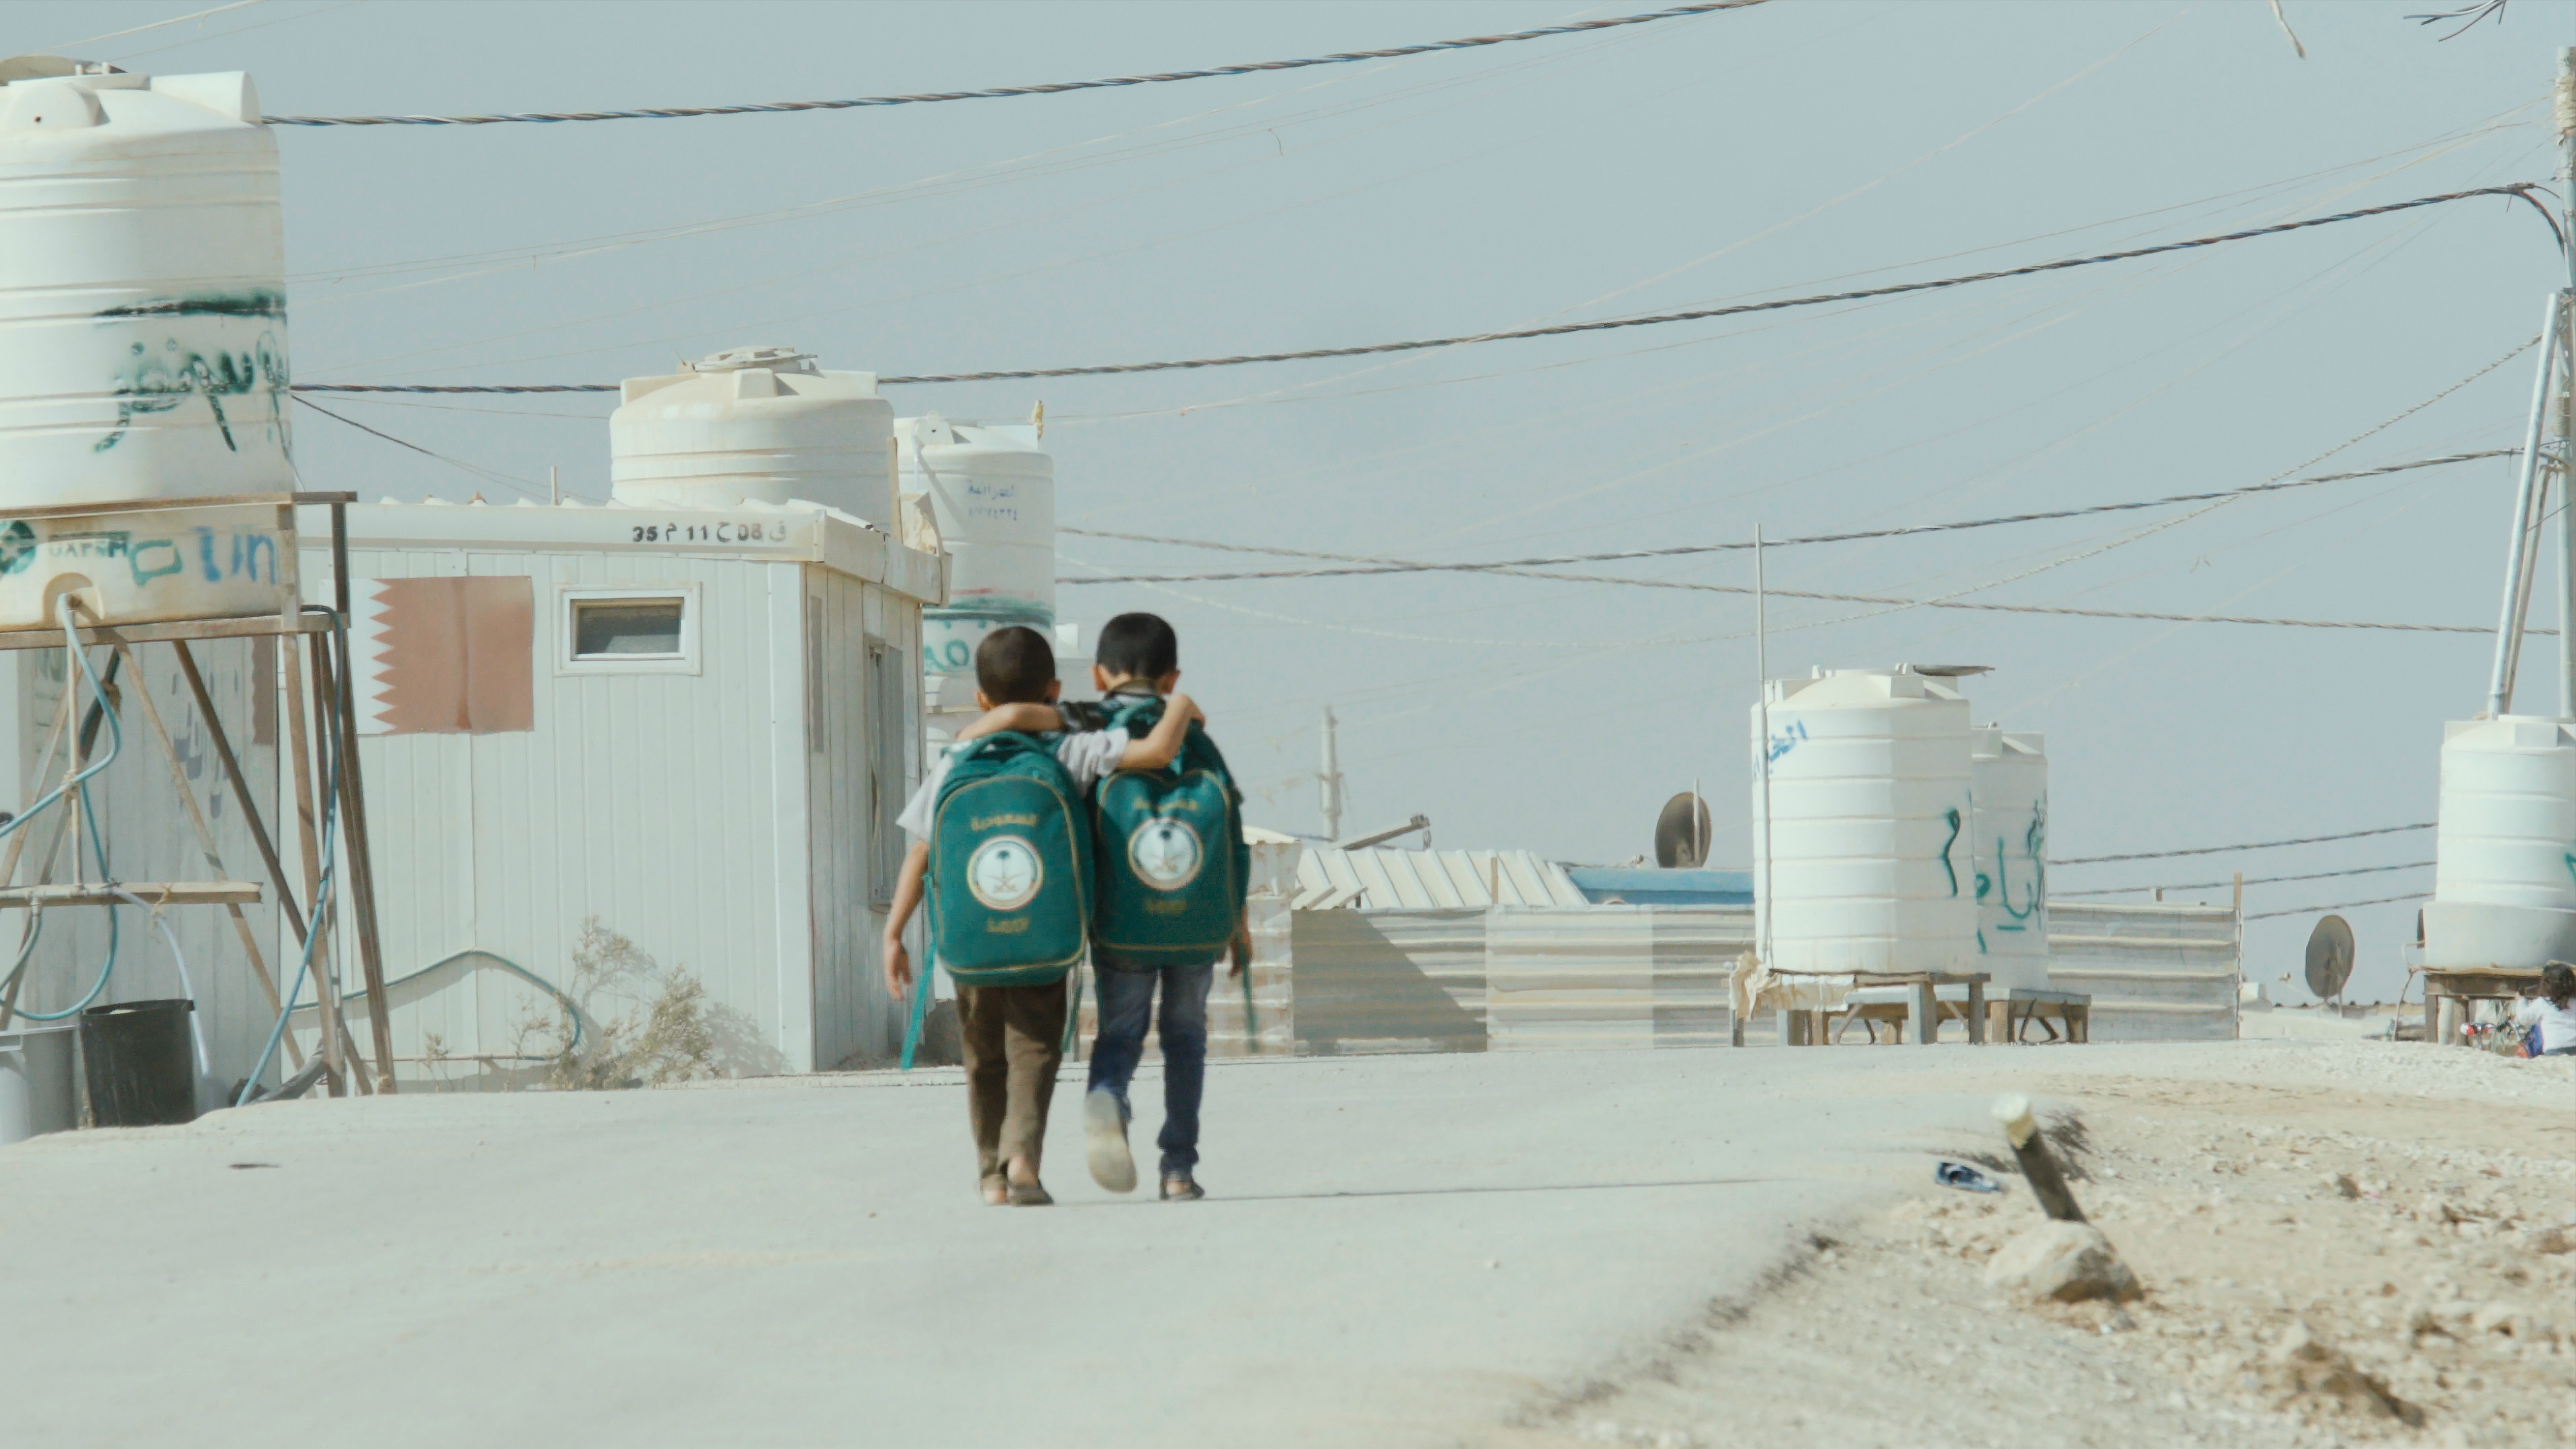 Two boys walking to/from school in a refugee camp